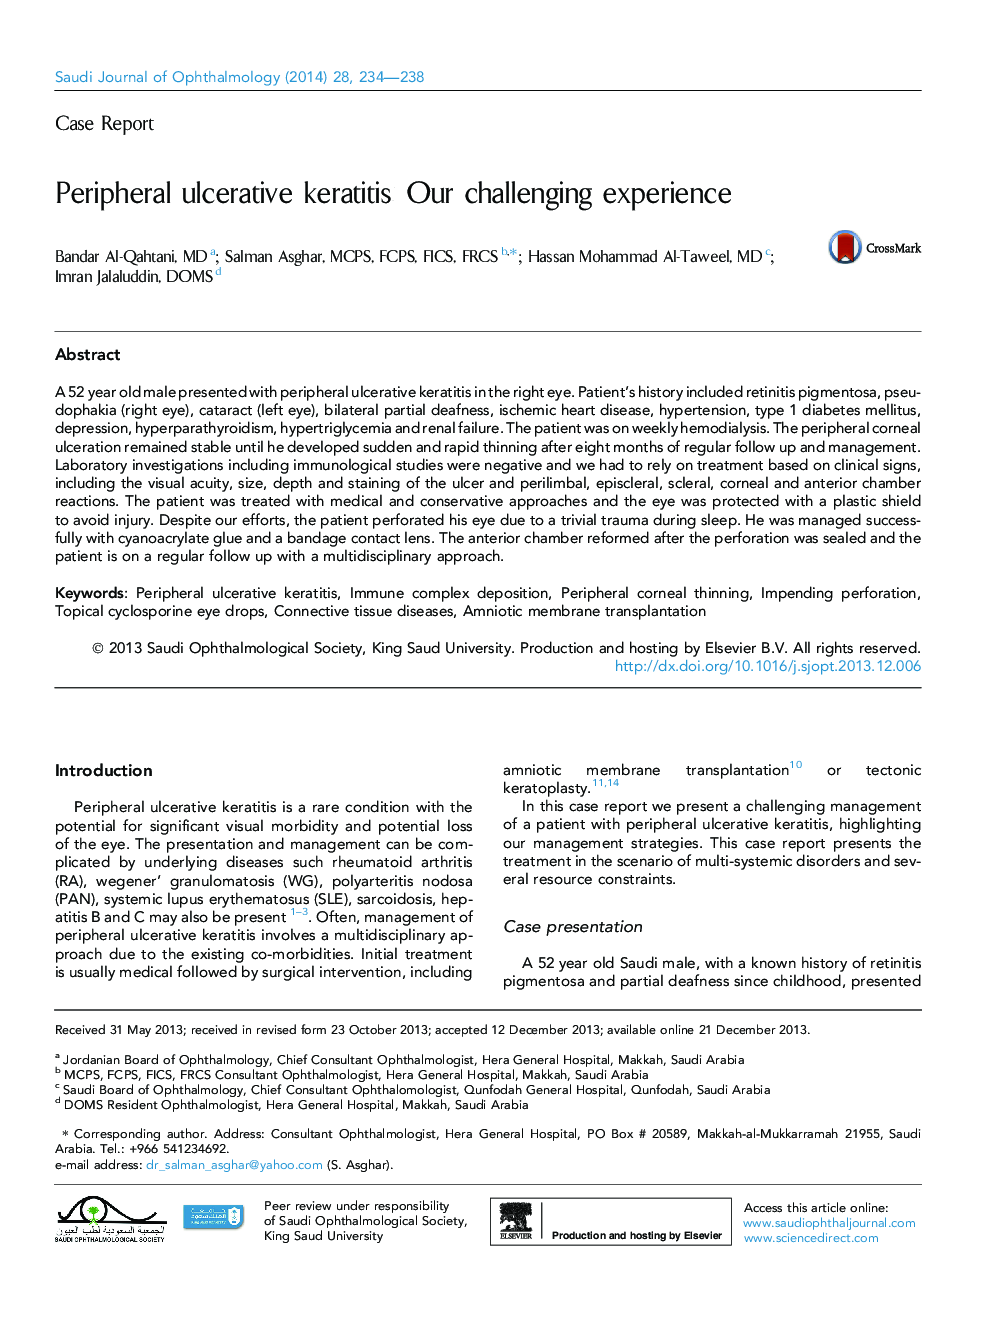 Peripheral ulcerative keratitis: Our challenging experience 